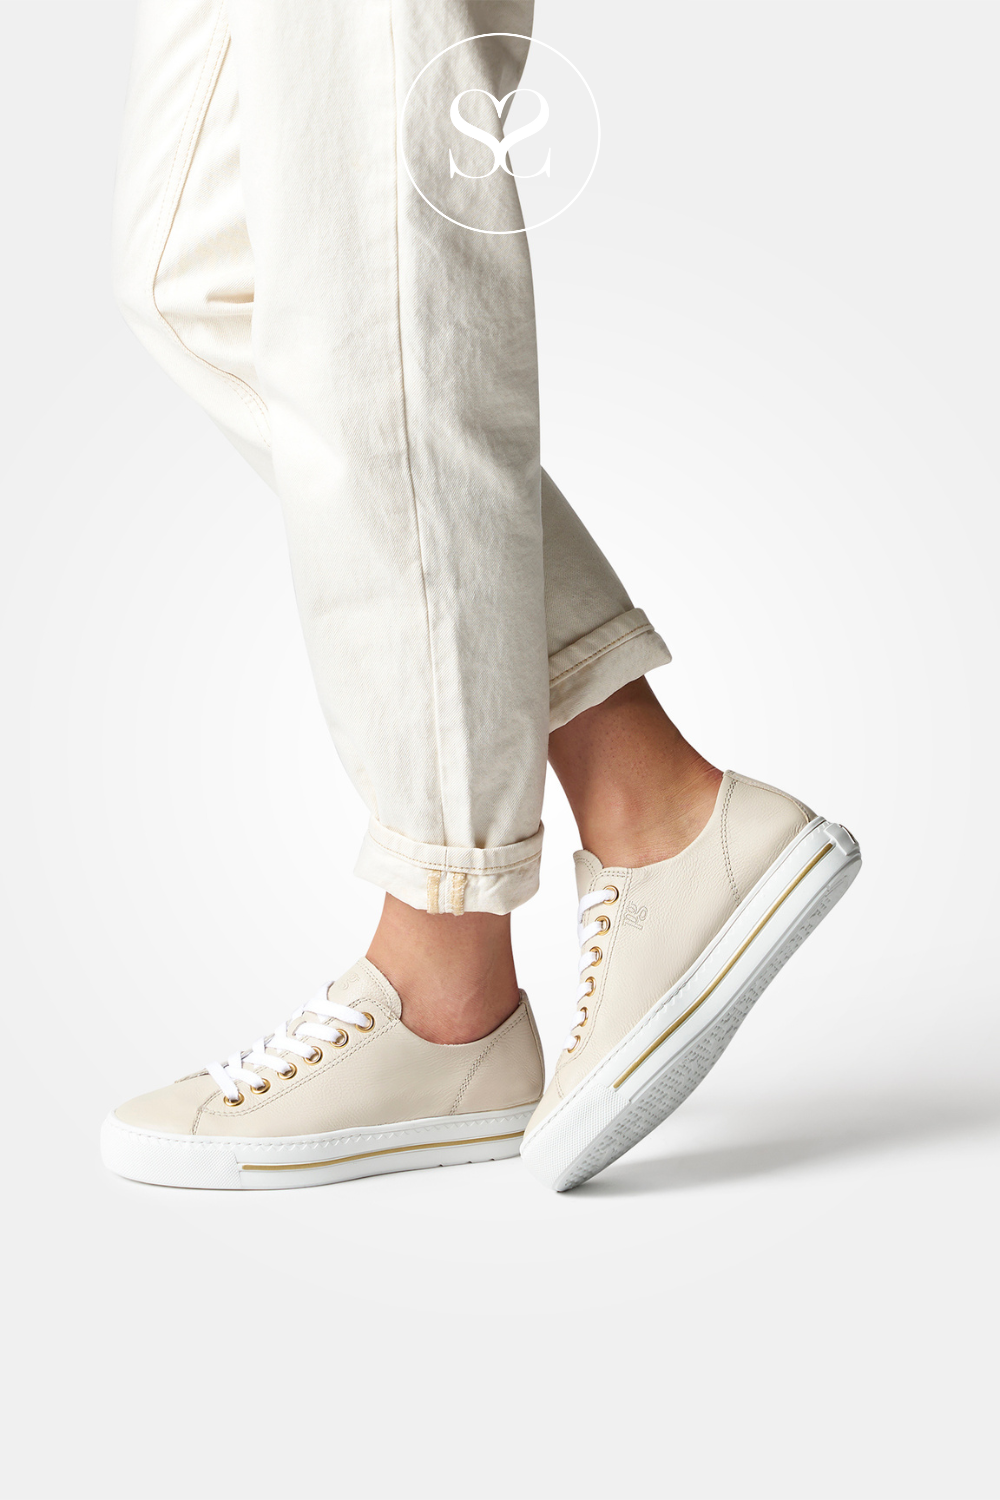 PAUL GREEN 4704 - CREAM LEATHER TRAINERS